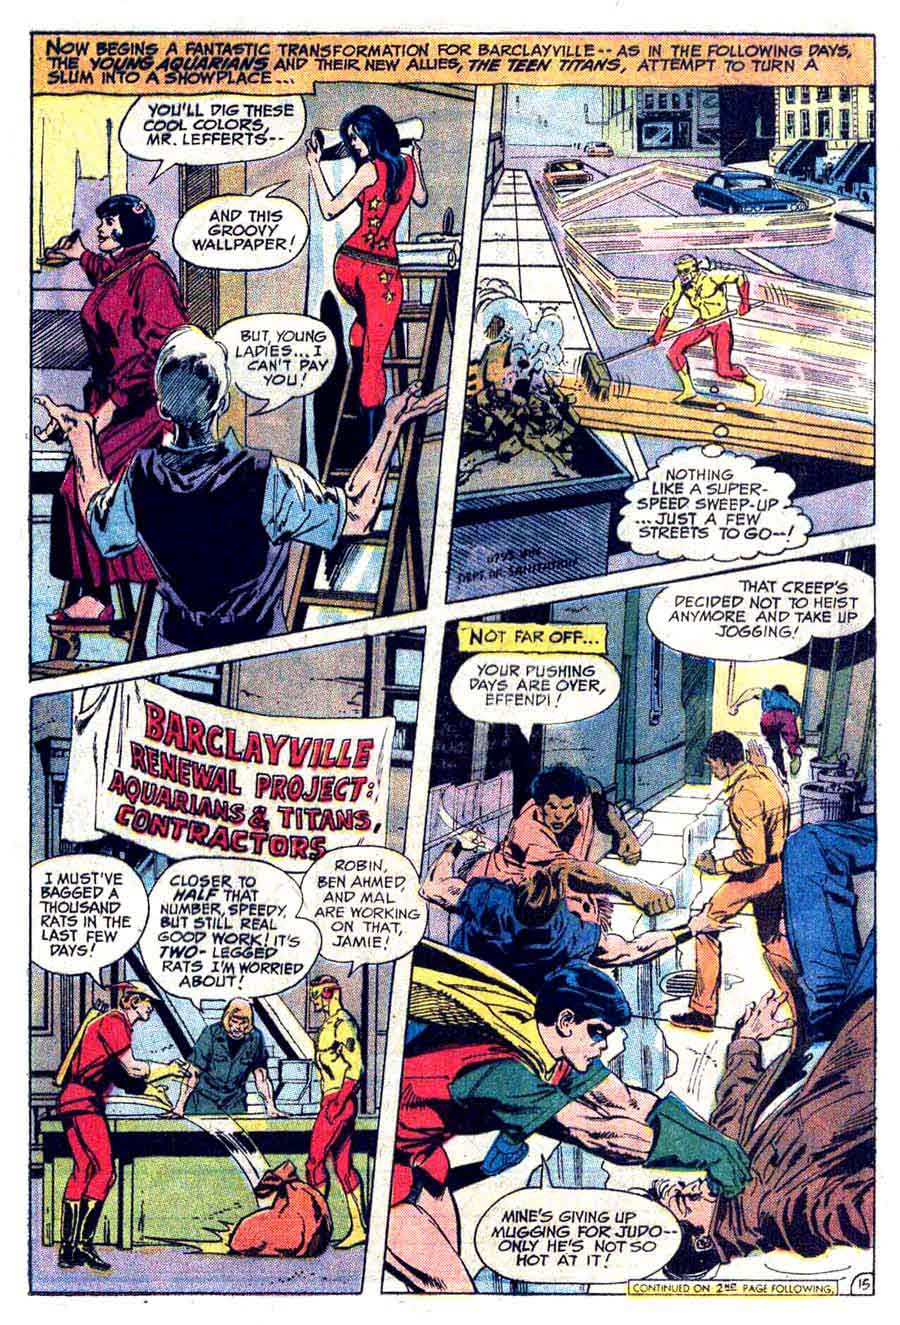 Brave and the Bold v1 #102 dc comic book page art by Neal Adams